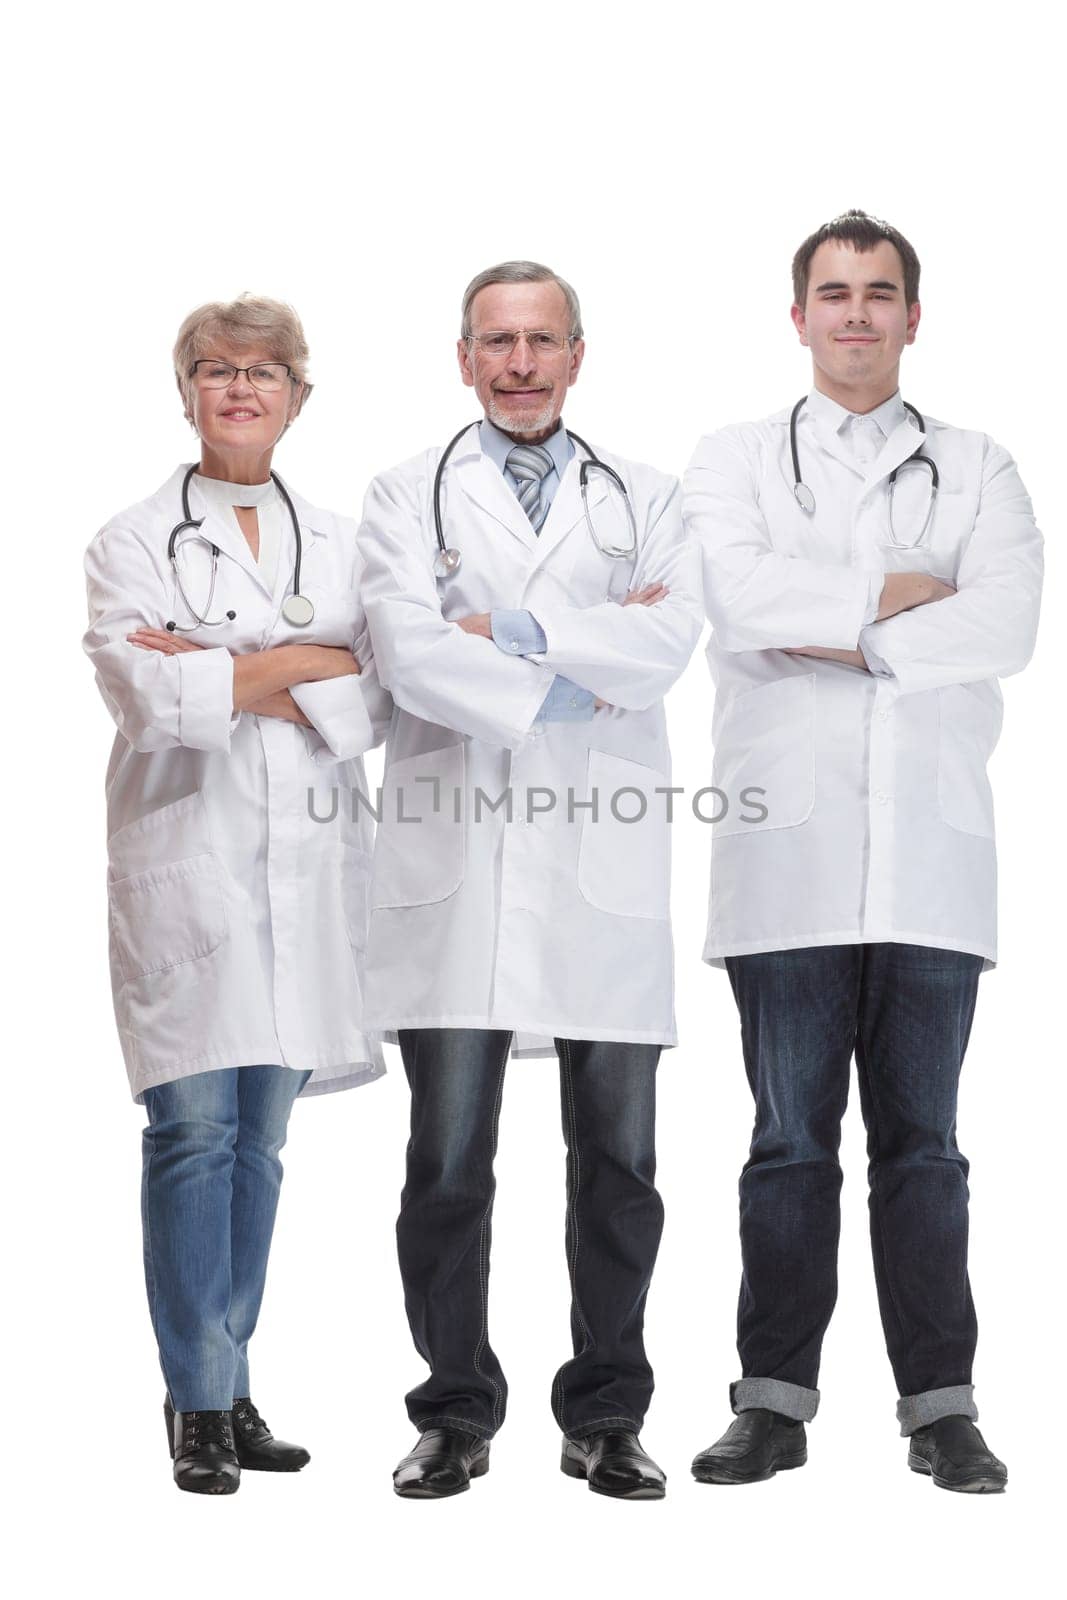 Portrait of group of smiling hospital colleagues standing together. Healthcare and medicine concept